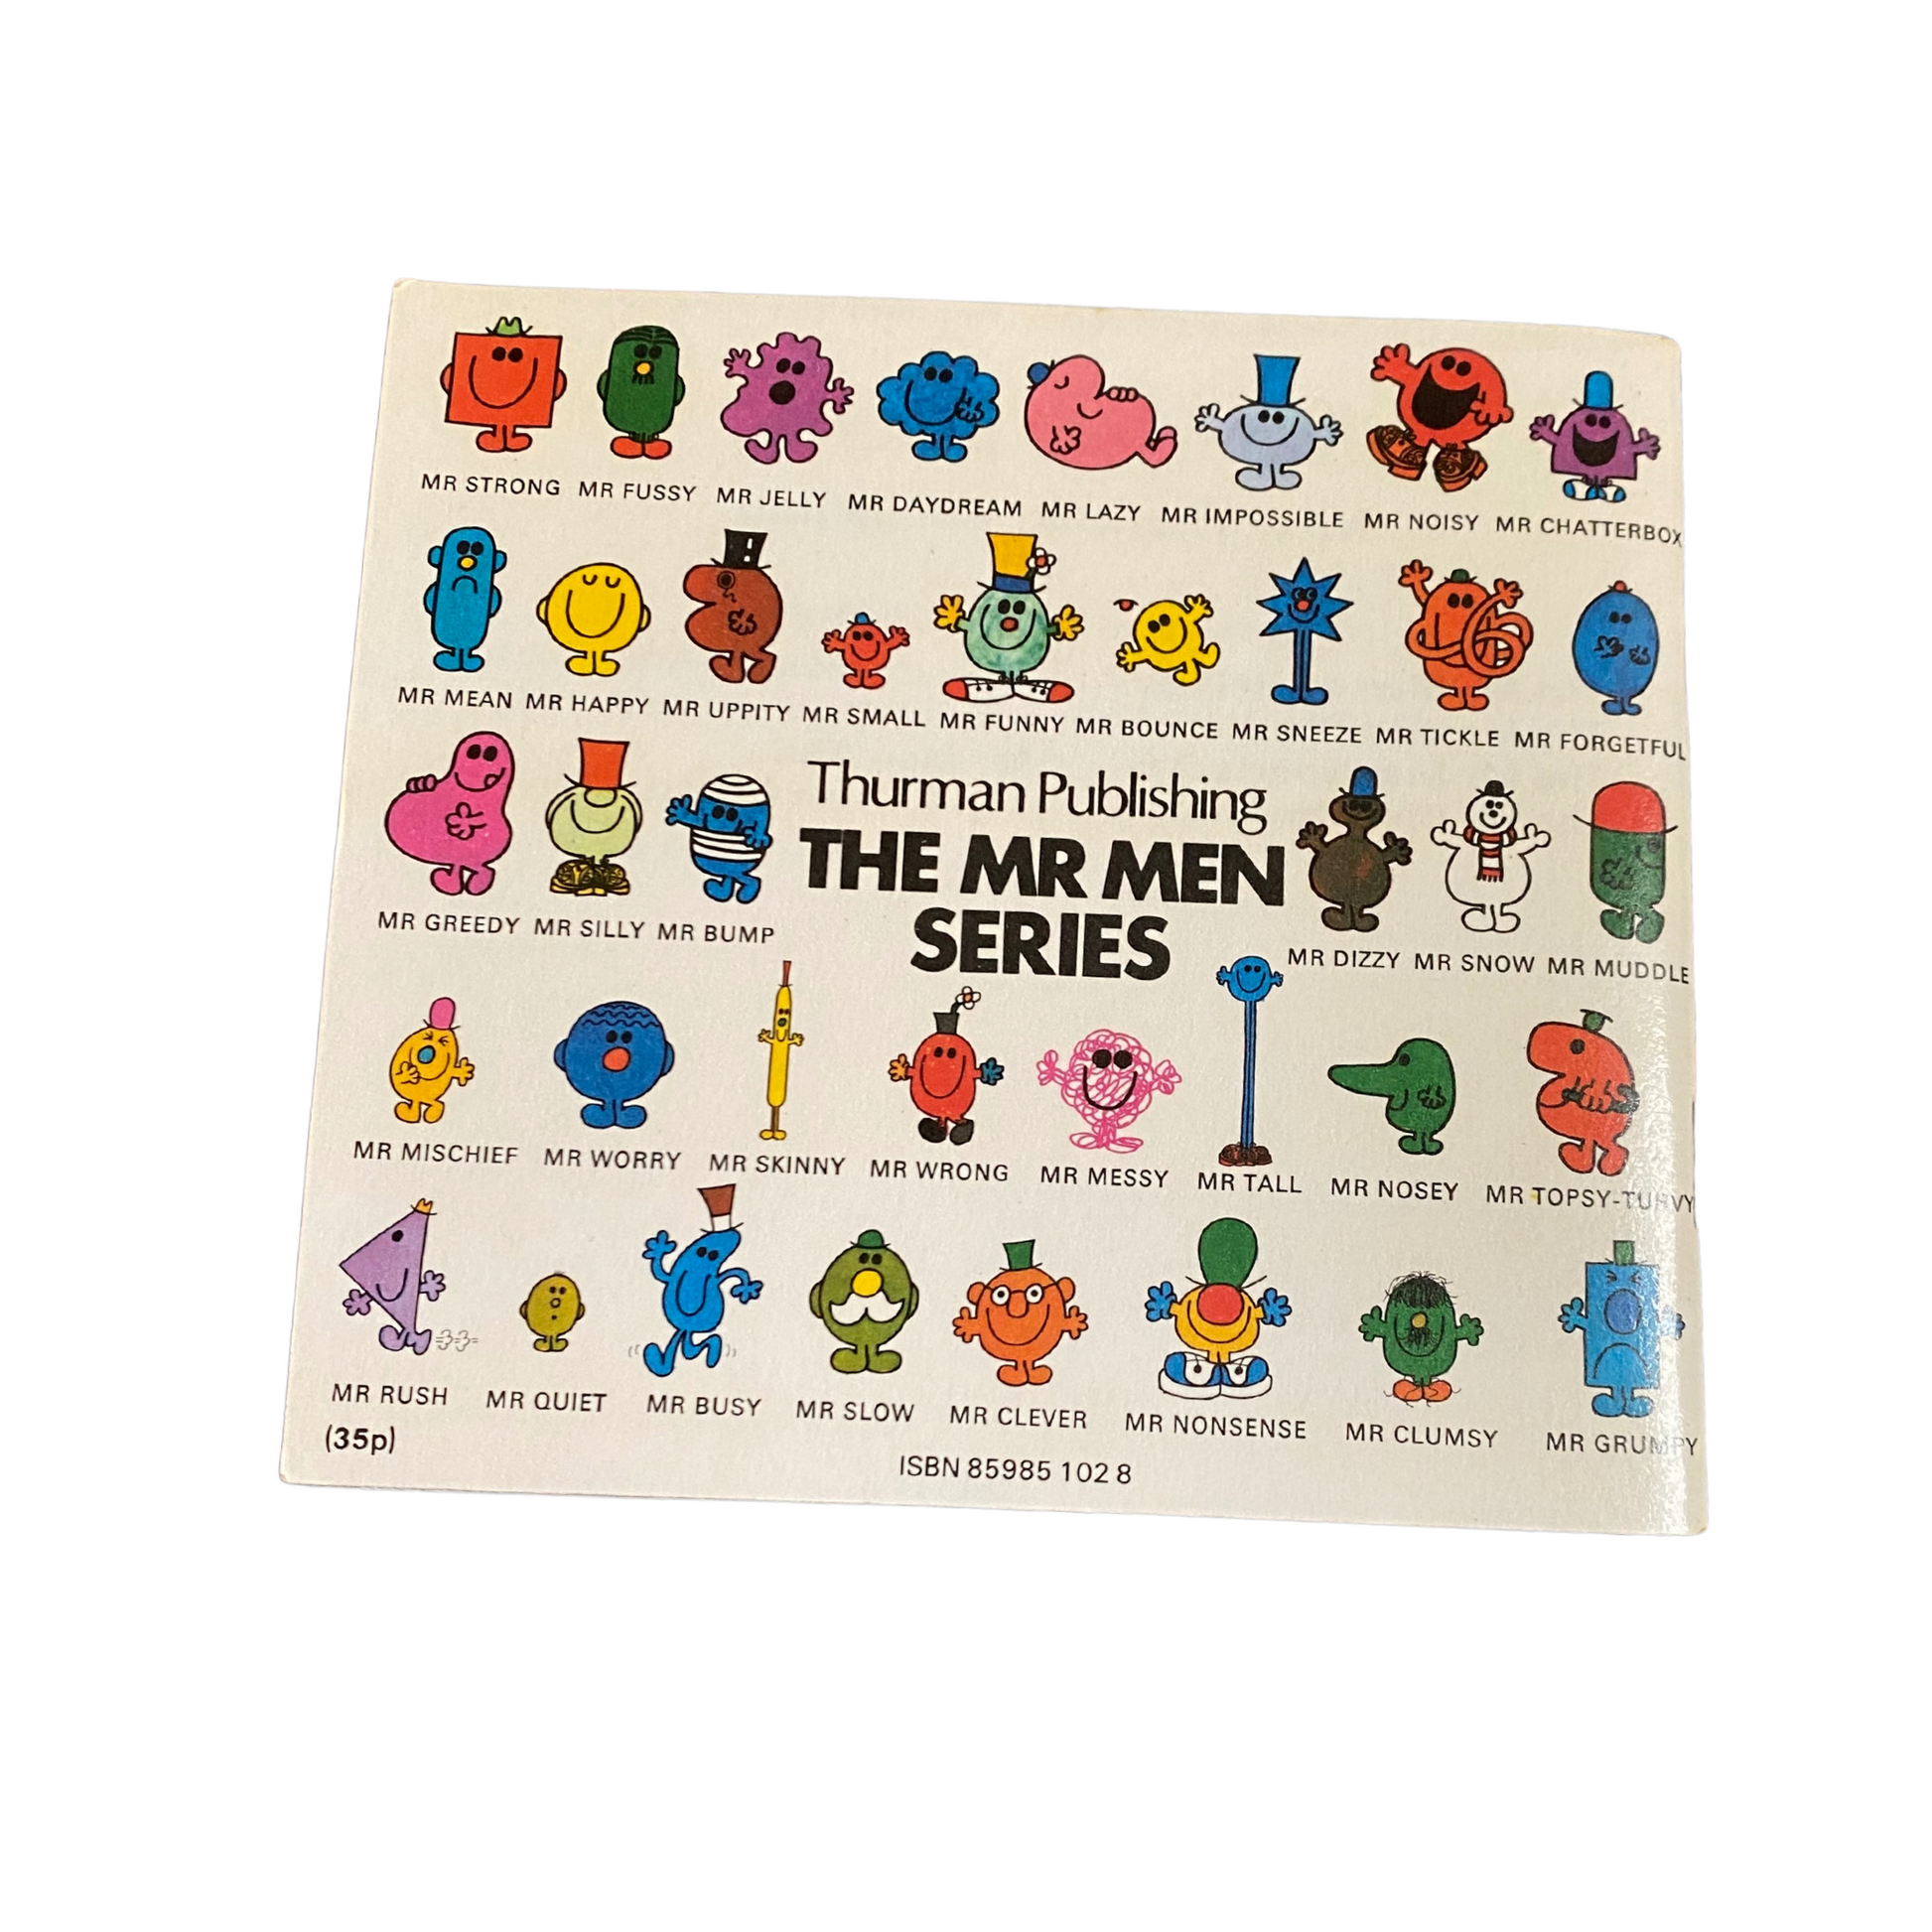 Classic Mr. Men Book - Mr Wrong  - 1970s Edition  Back cover 